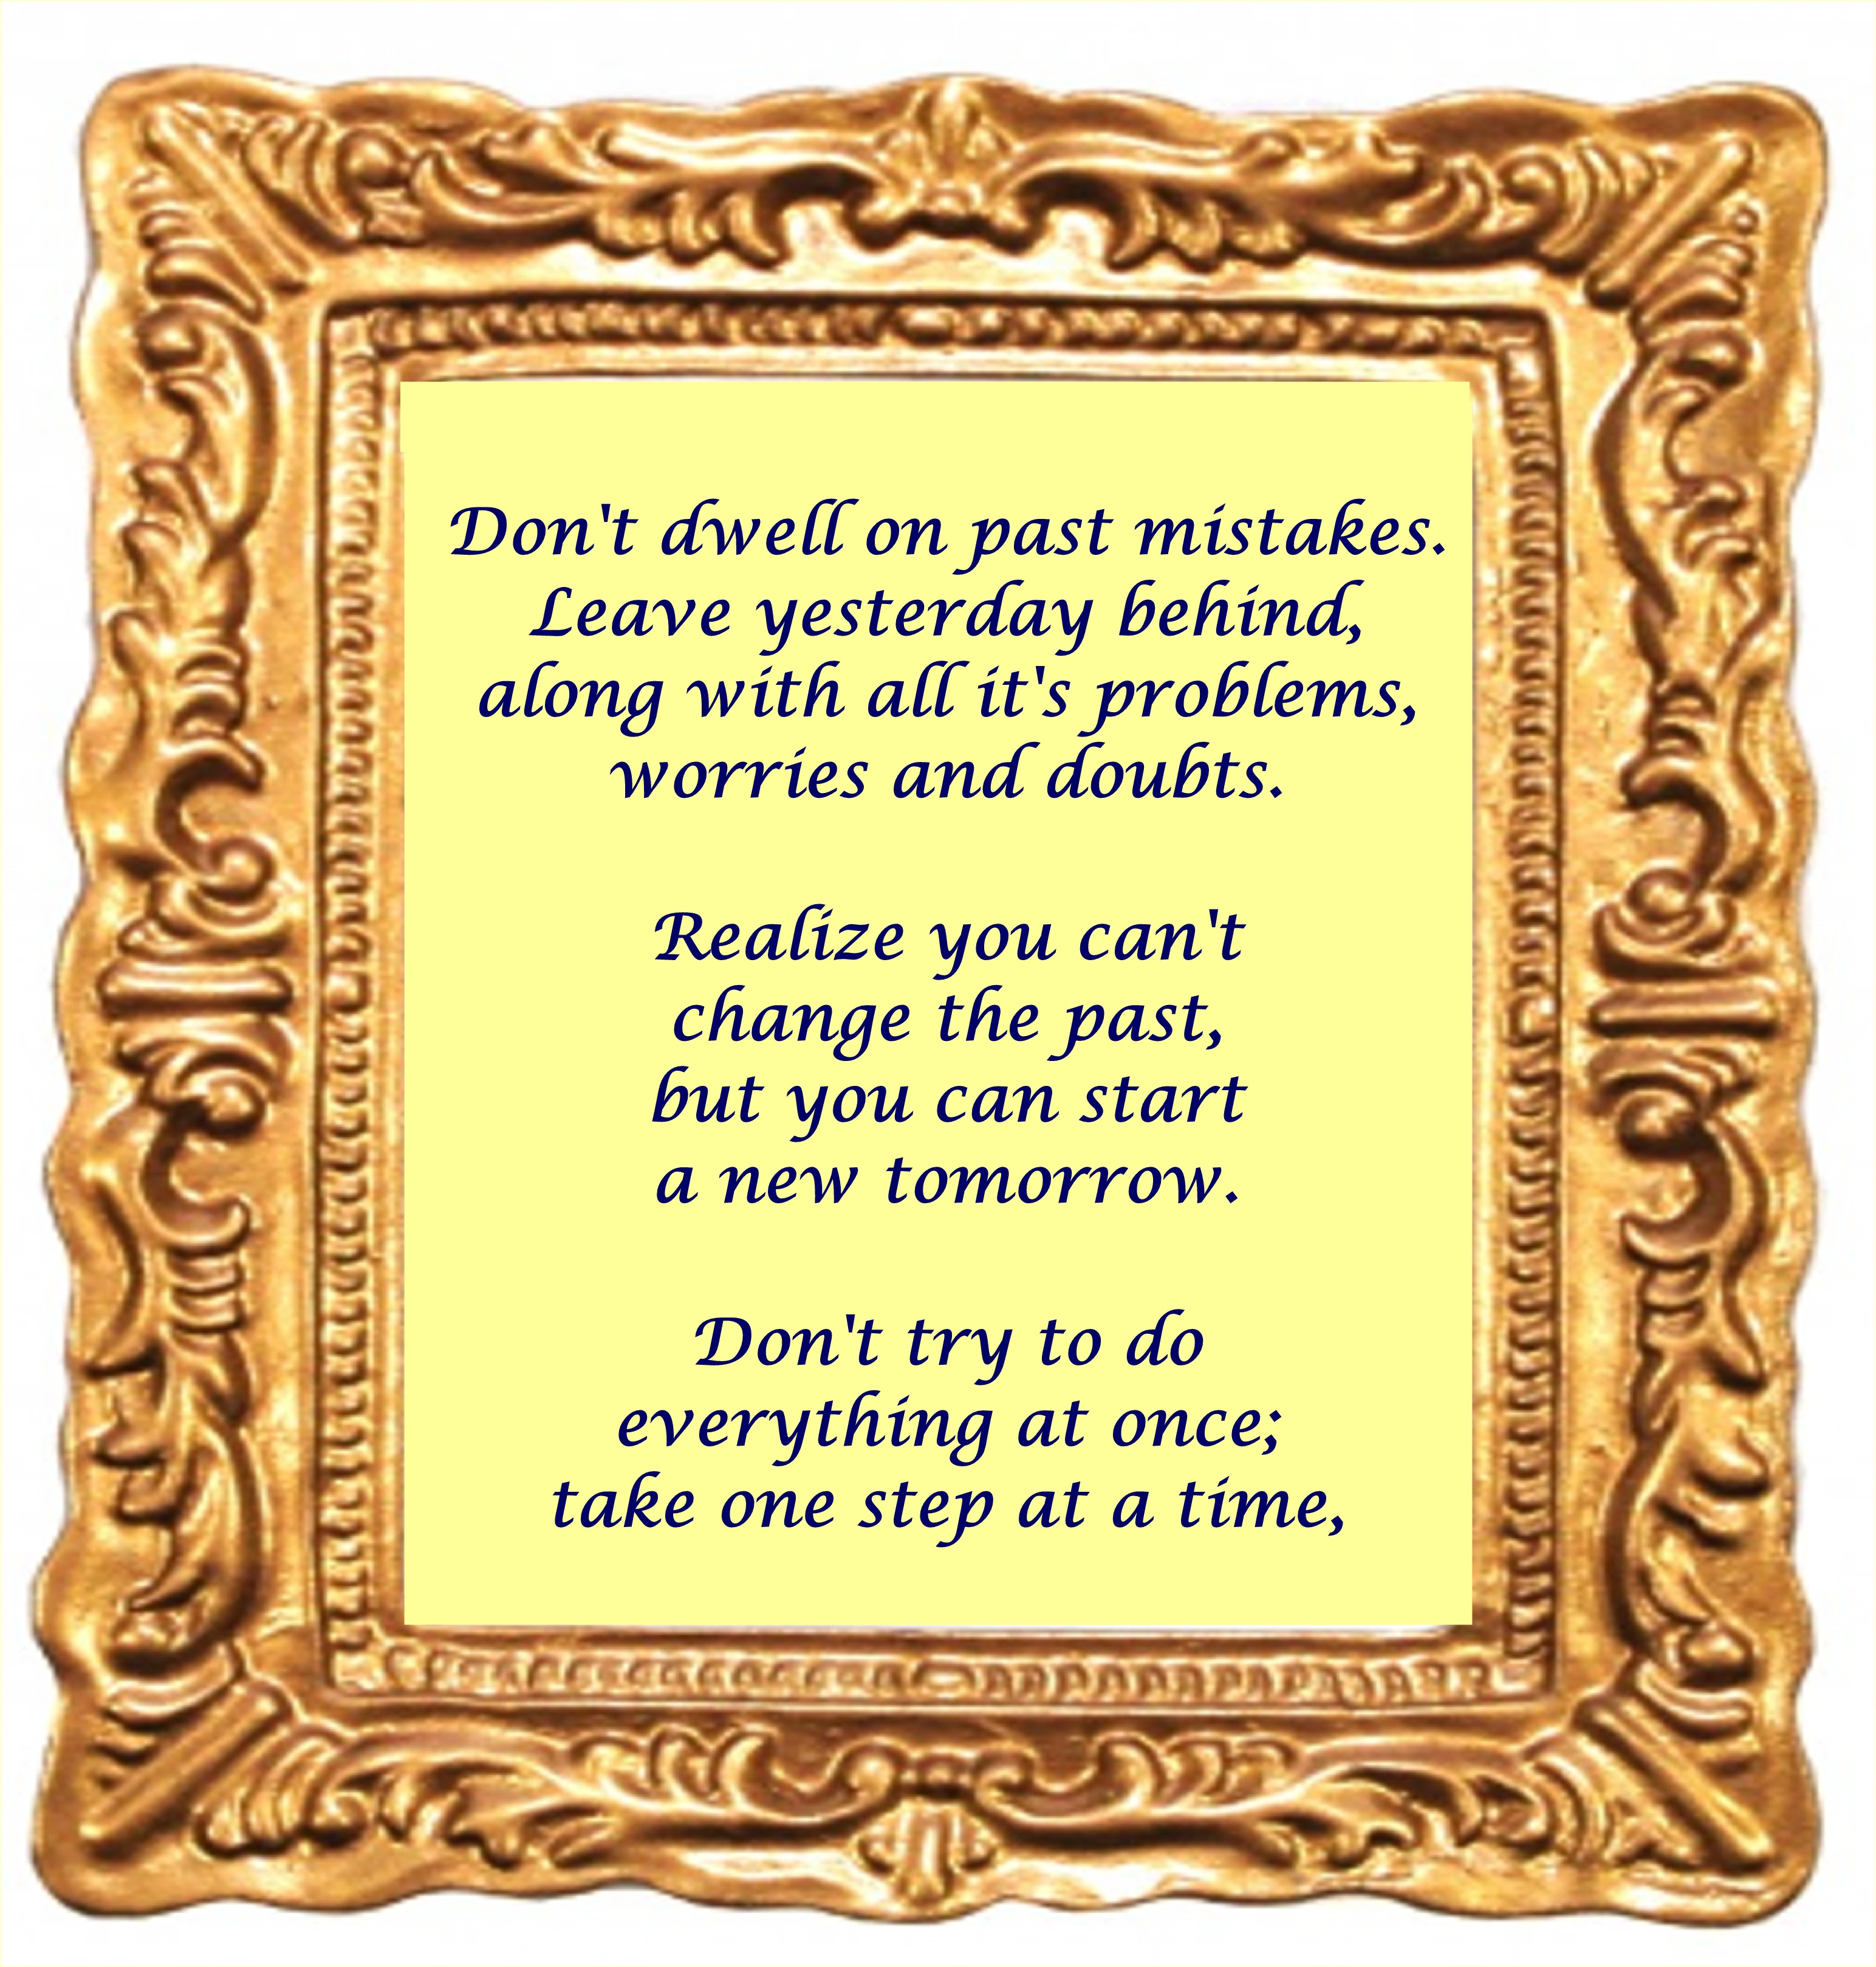 Don't dwell on past mistakes